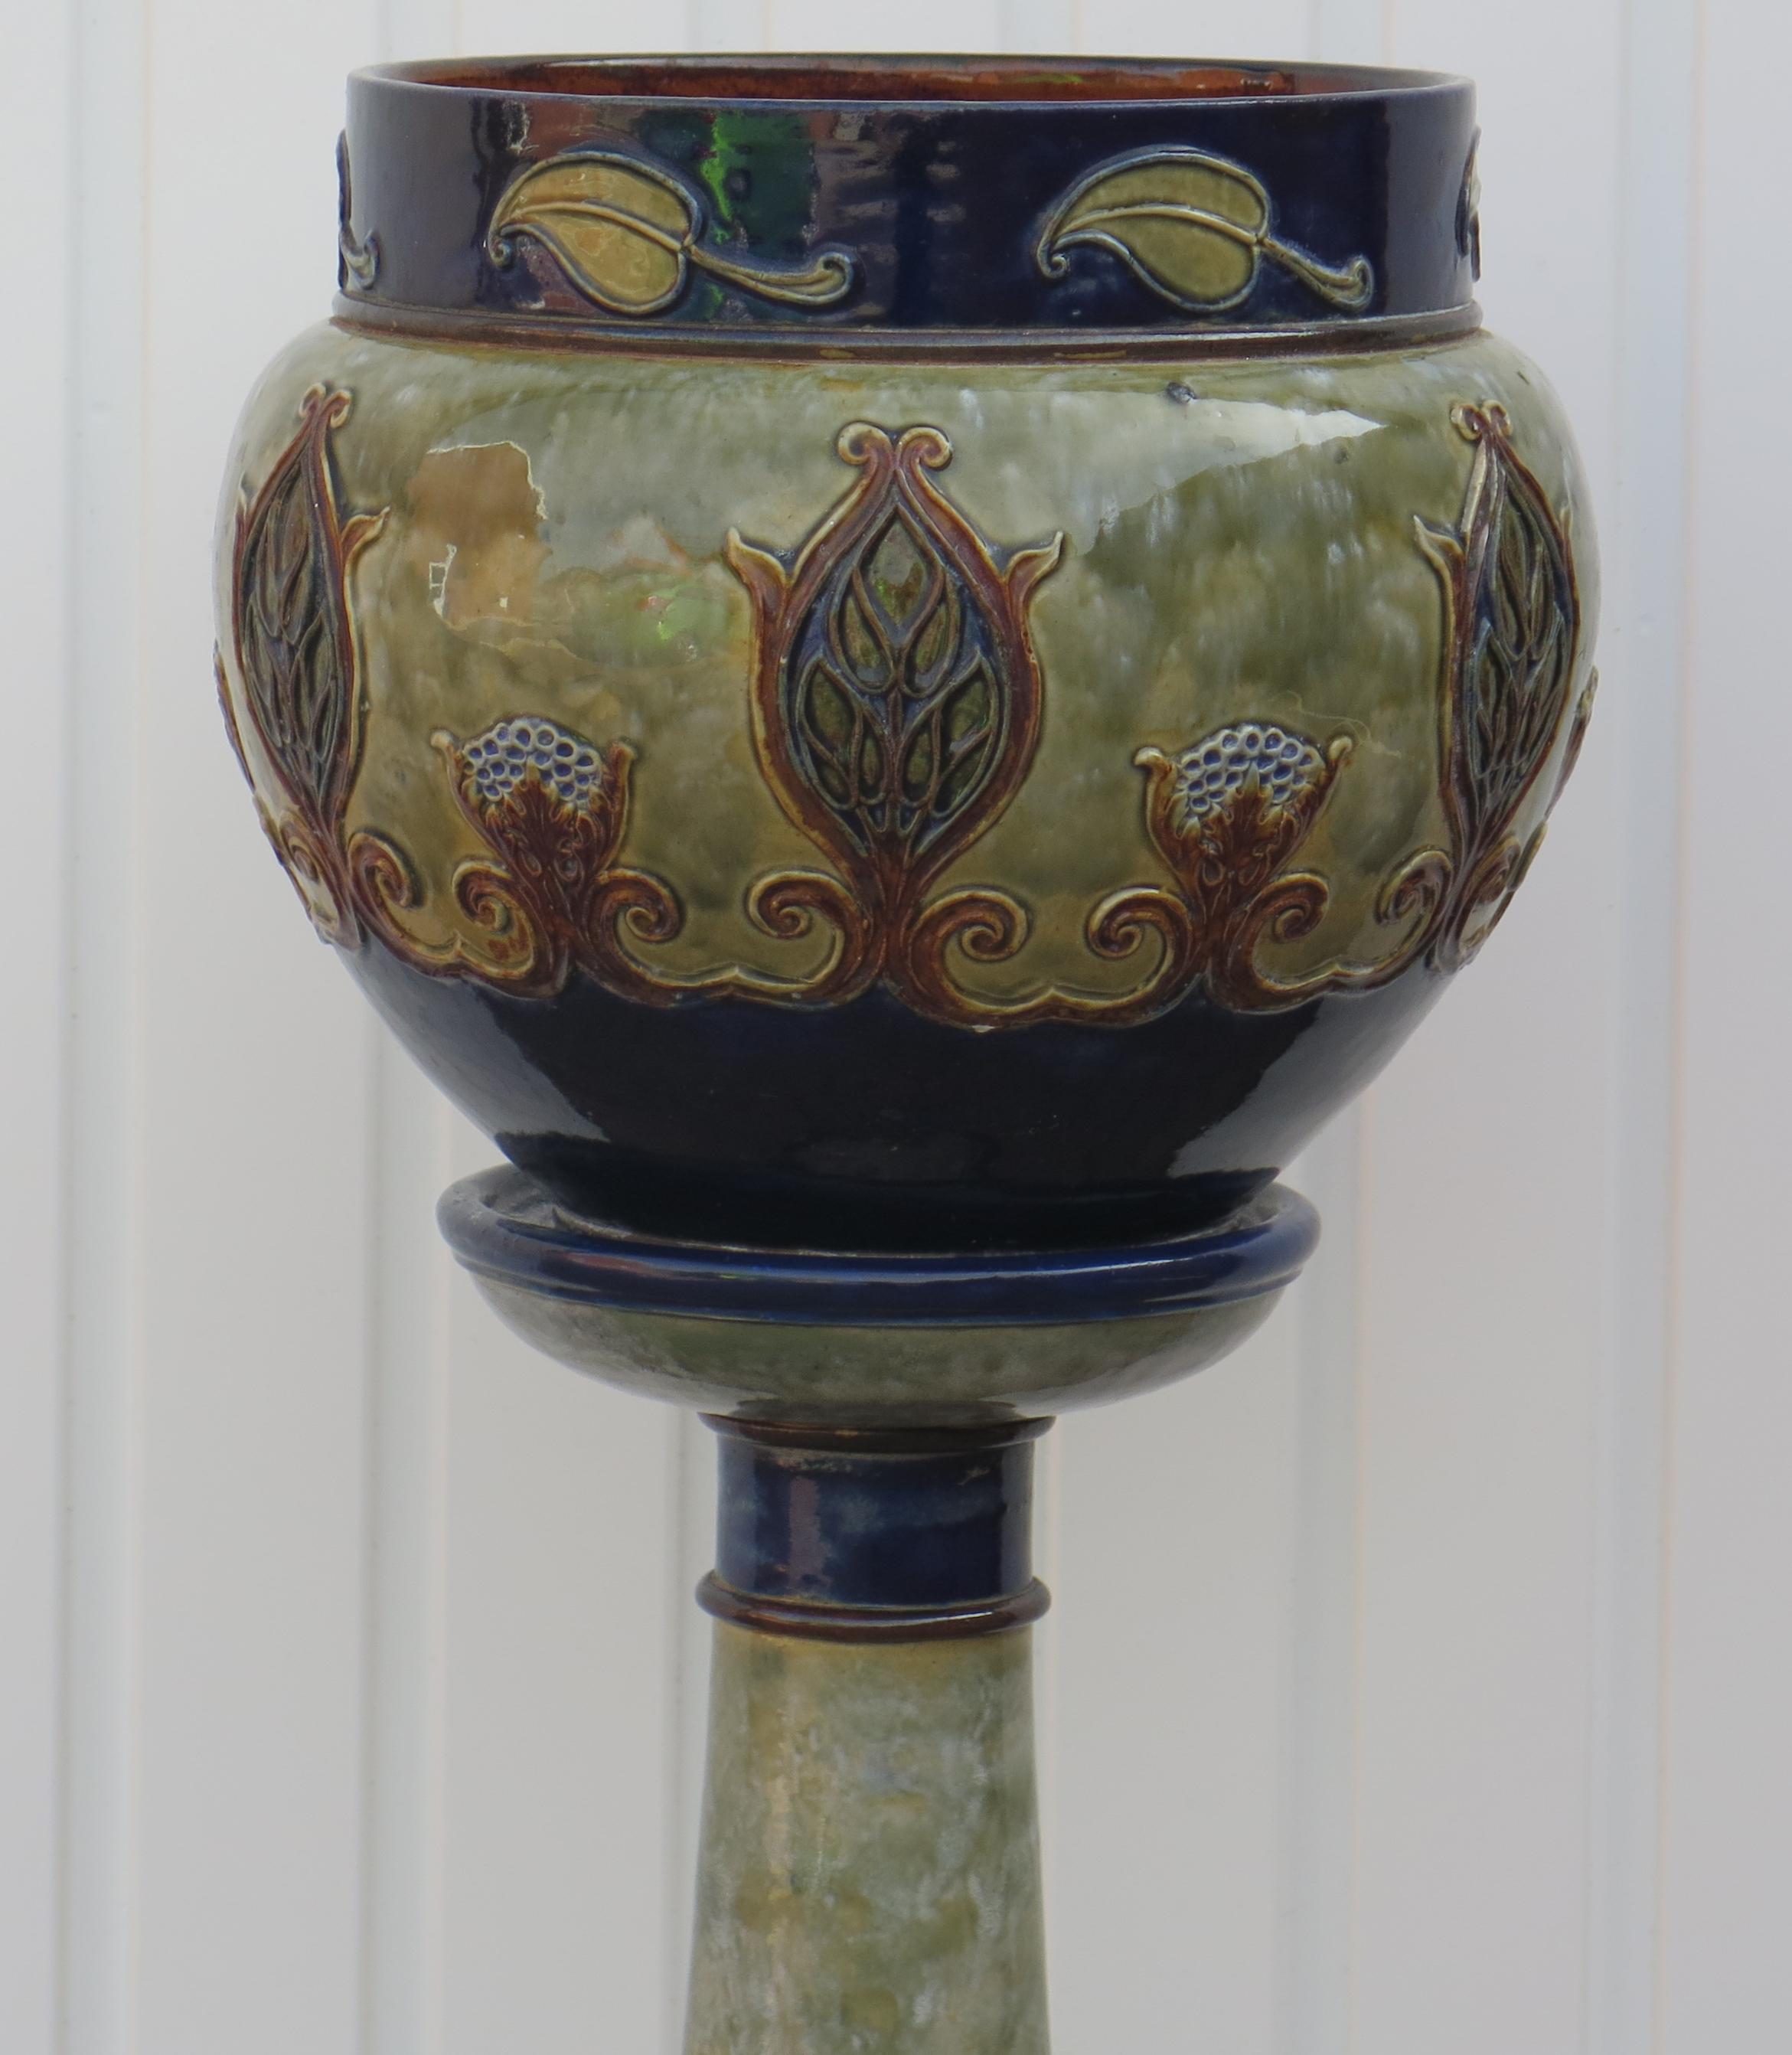 This is a very good large Jardiniere on Stand made by Doulton Lambeth, dating to Circa 1925.

This is a large, impressive and very decorative floor standing piece. 

The decoration has an applied moulded floral decoration all in the Art Nouveau